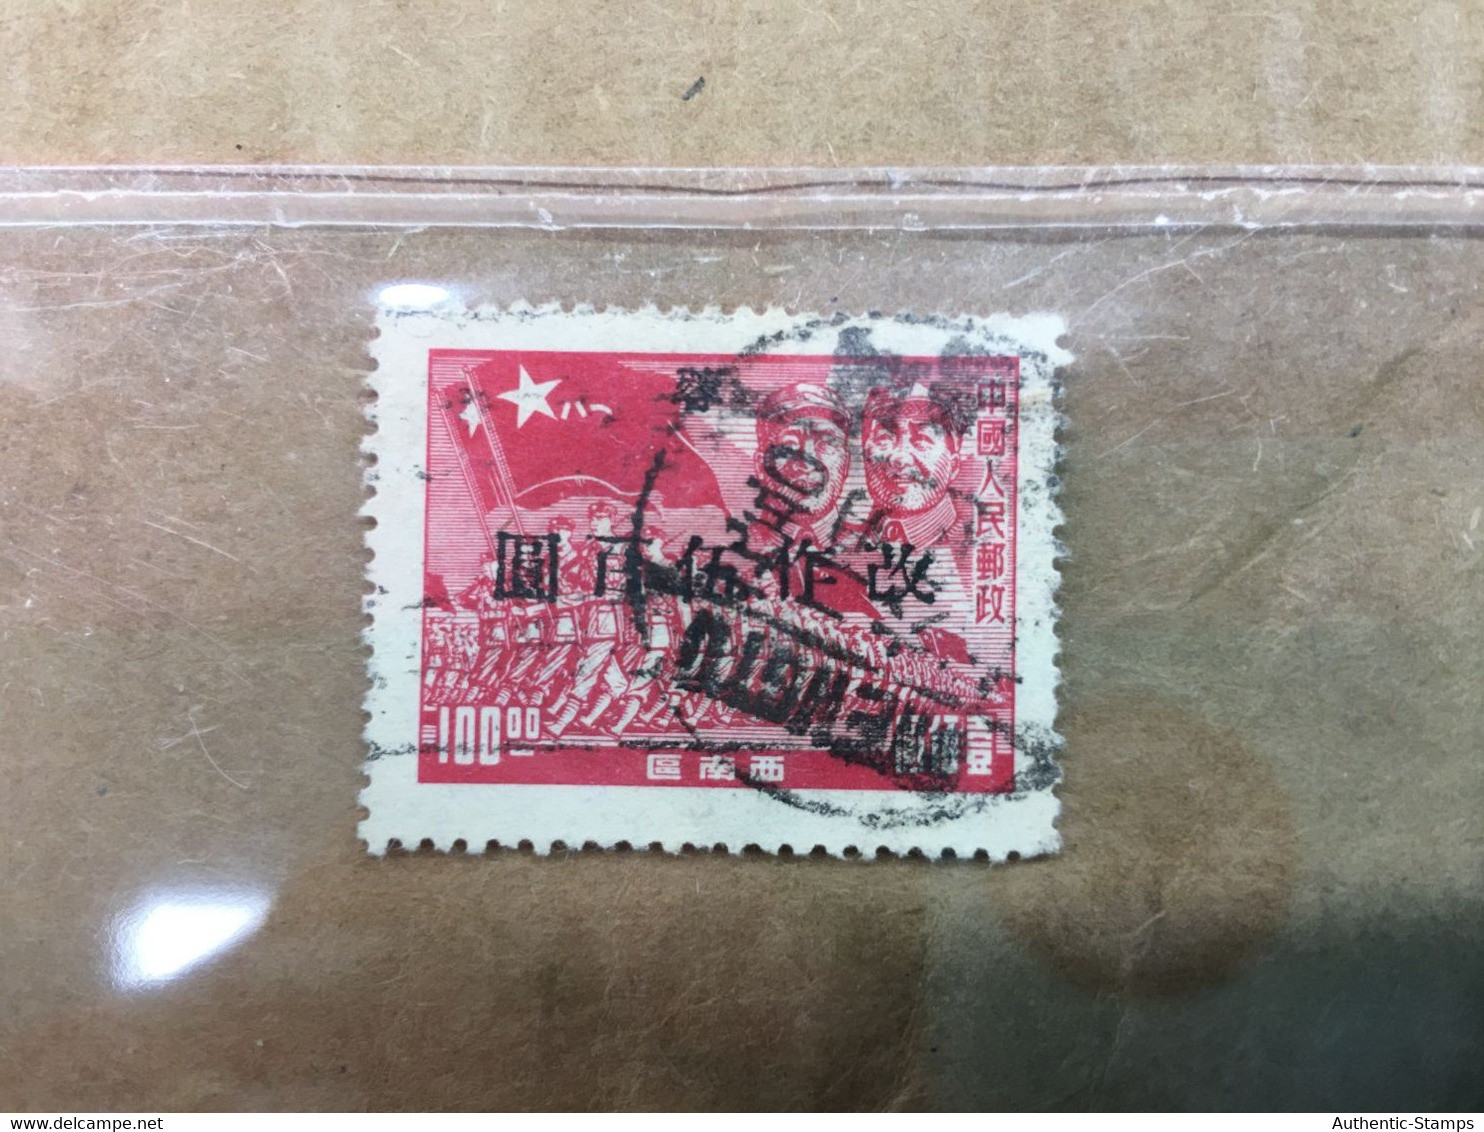 CHINA STAMP, Rare Overprint, For Chengdu City Use, USED, TIMBRO, STEMPEL, CINA, CHINE, LIST 5662 - Cina Del Sud-Ouest 1949-50